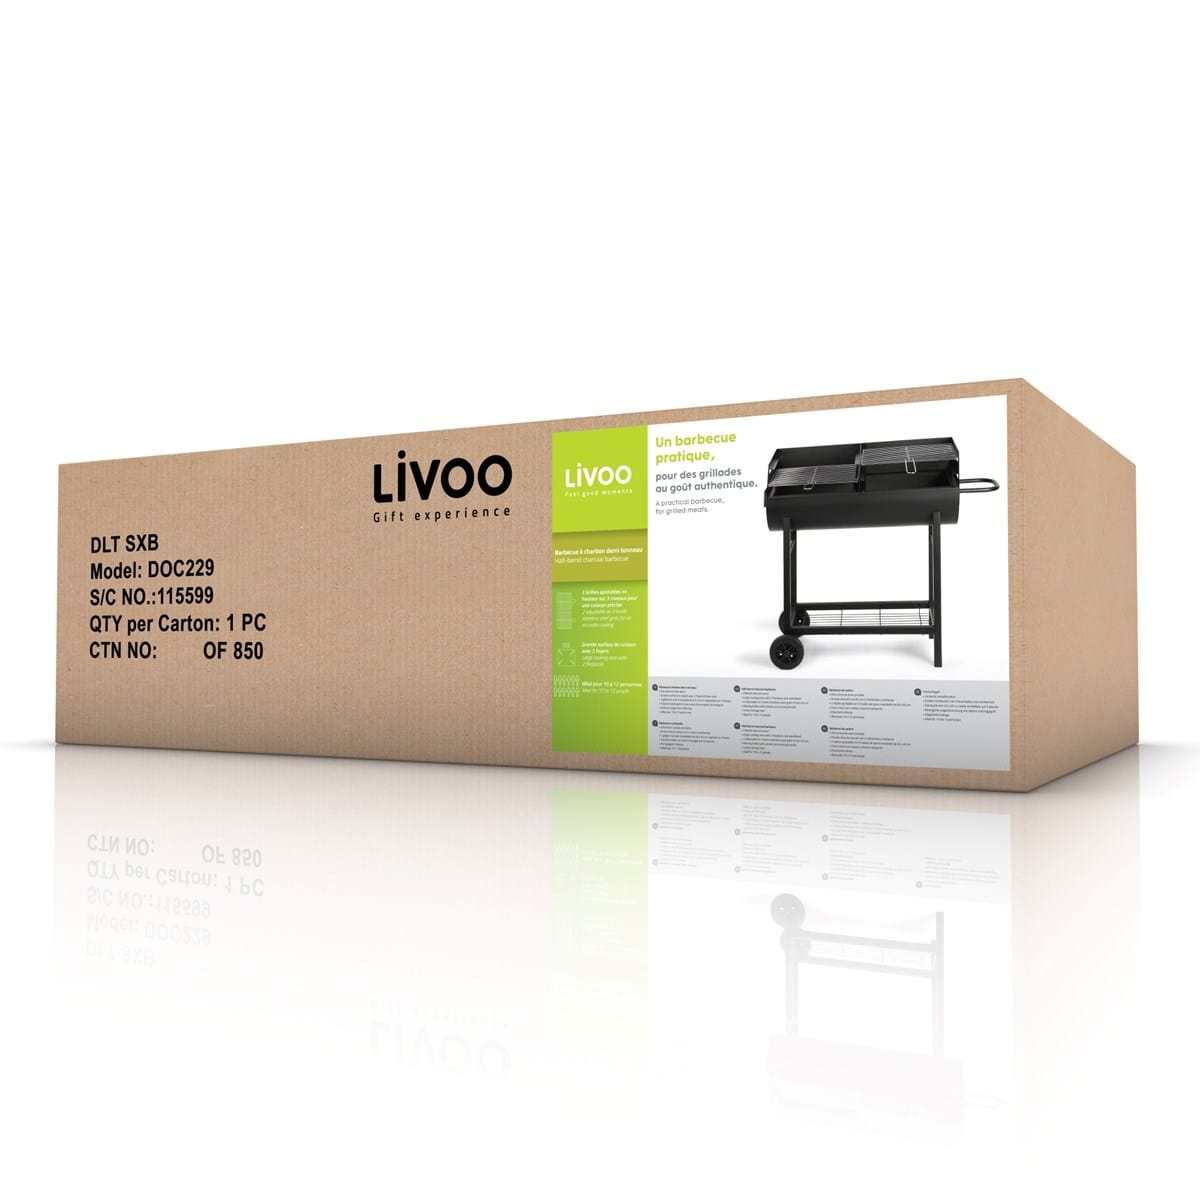 Livoo Gift Experience